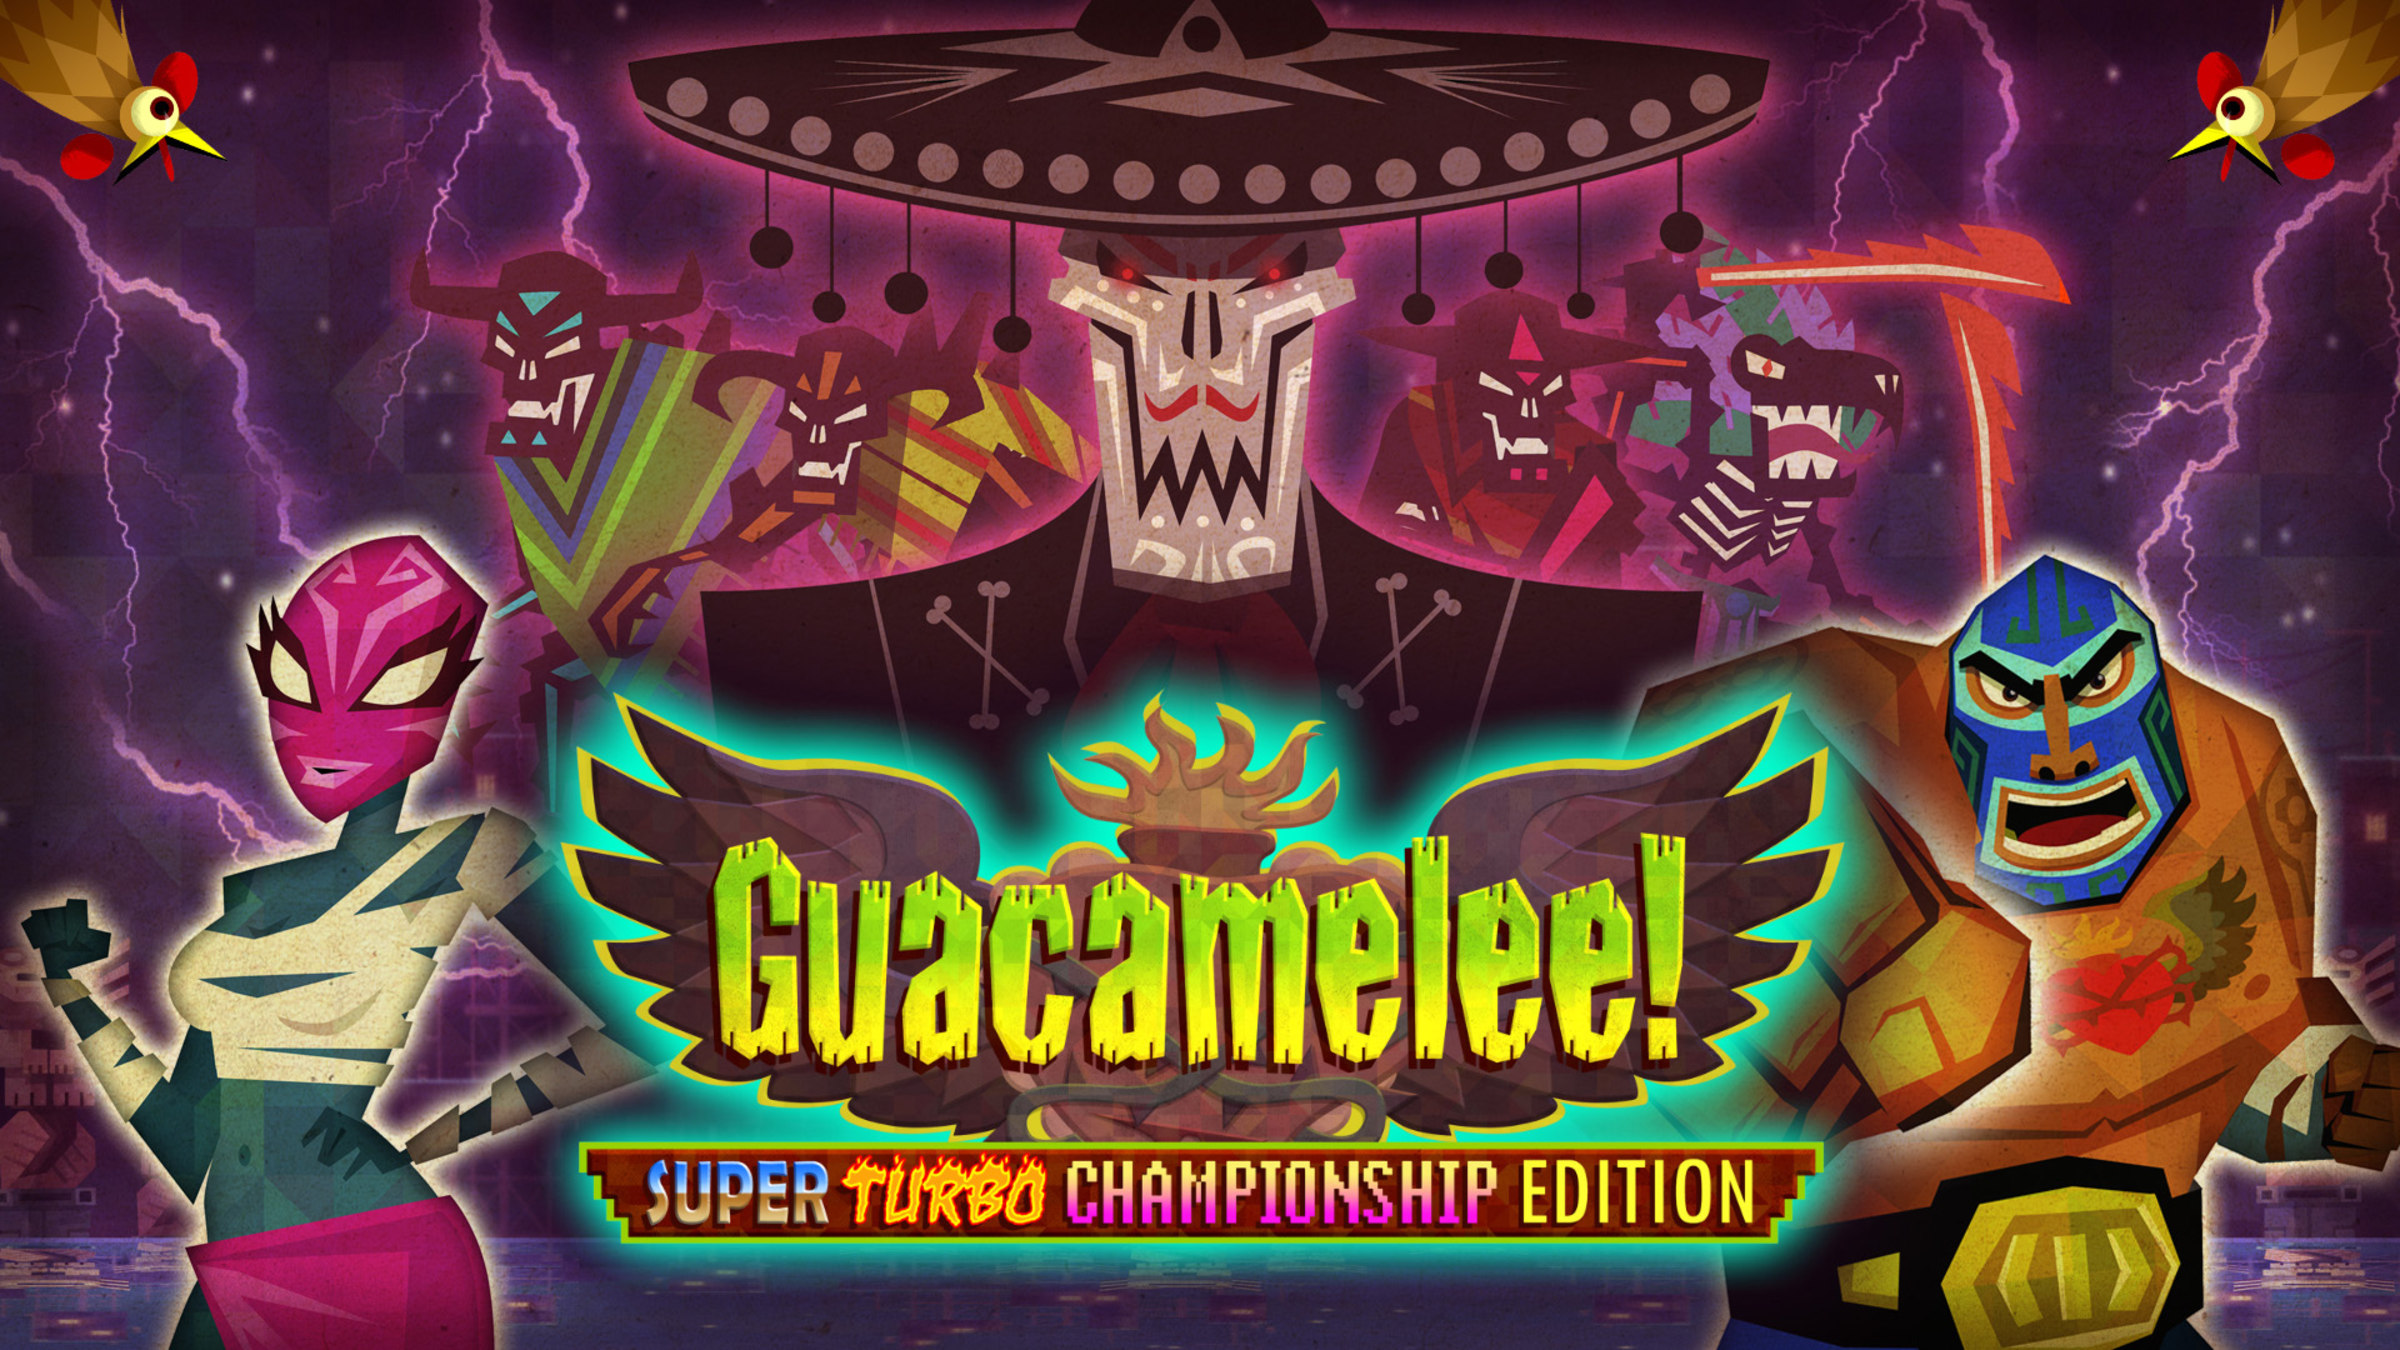 Nintendo Switch Digital Games: Guacamelee! Super Turbo Championship Edition $3.74, Guacamelee 2 $5 & More